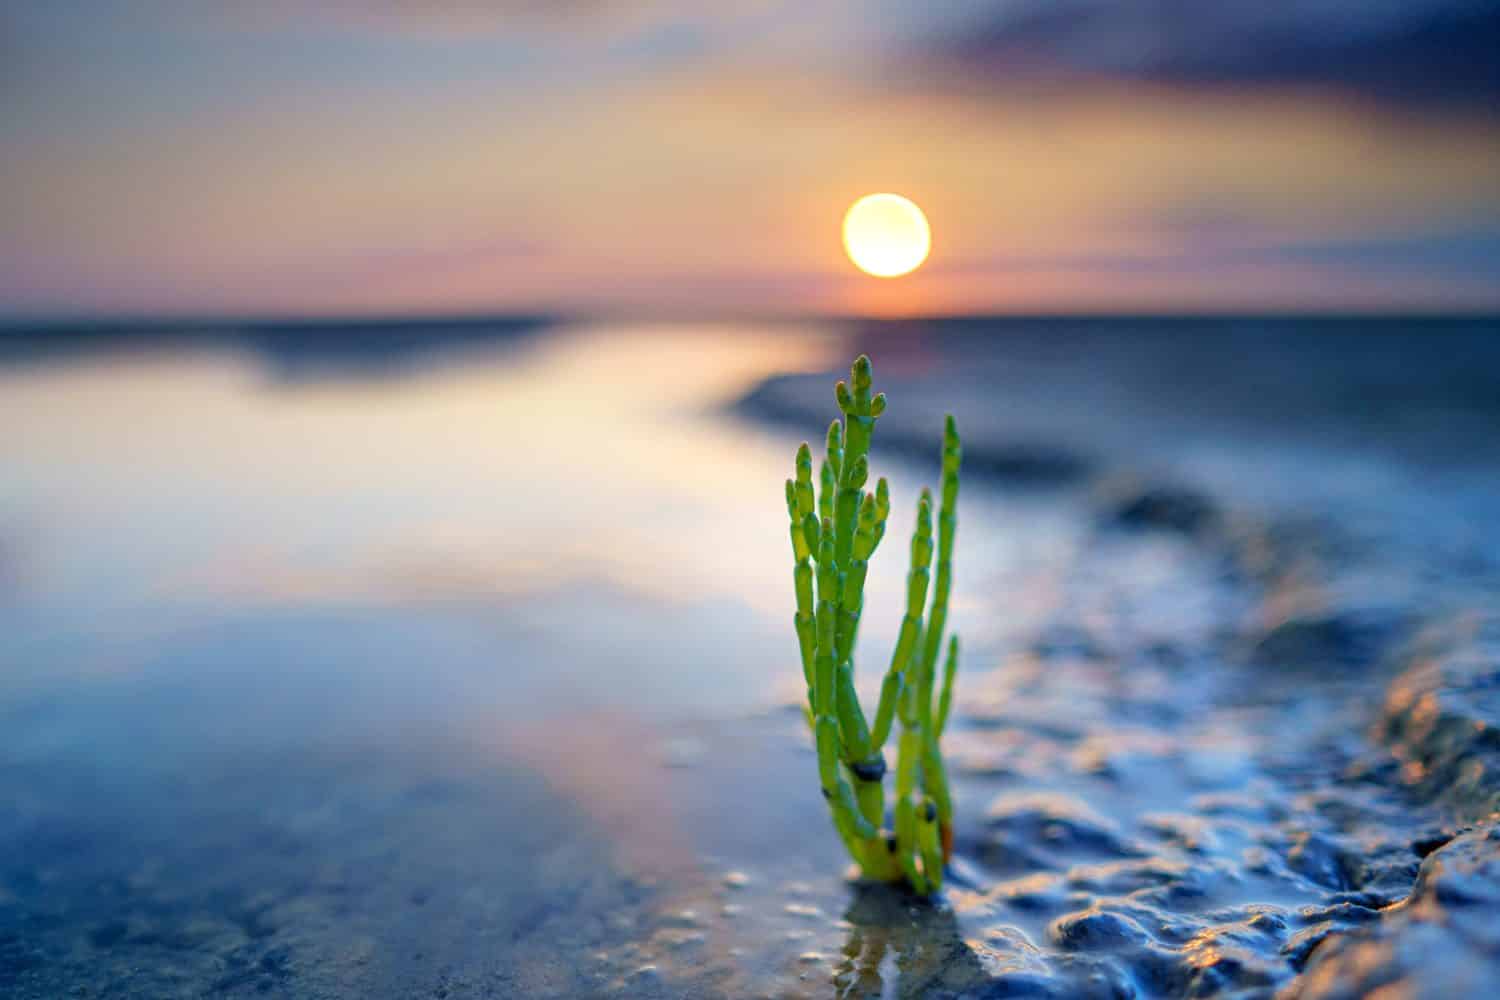 A closeup shot of the sea asparagus near the water area with a sunset view in the background